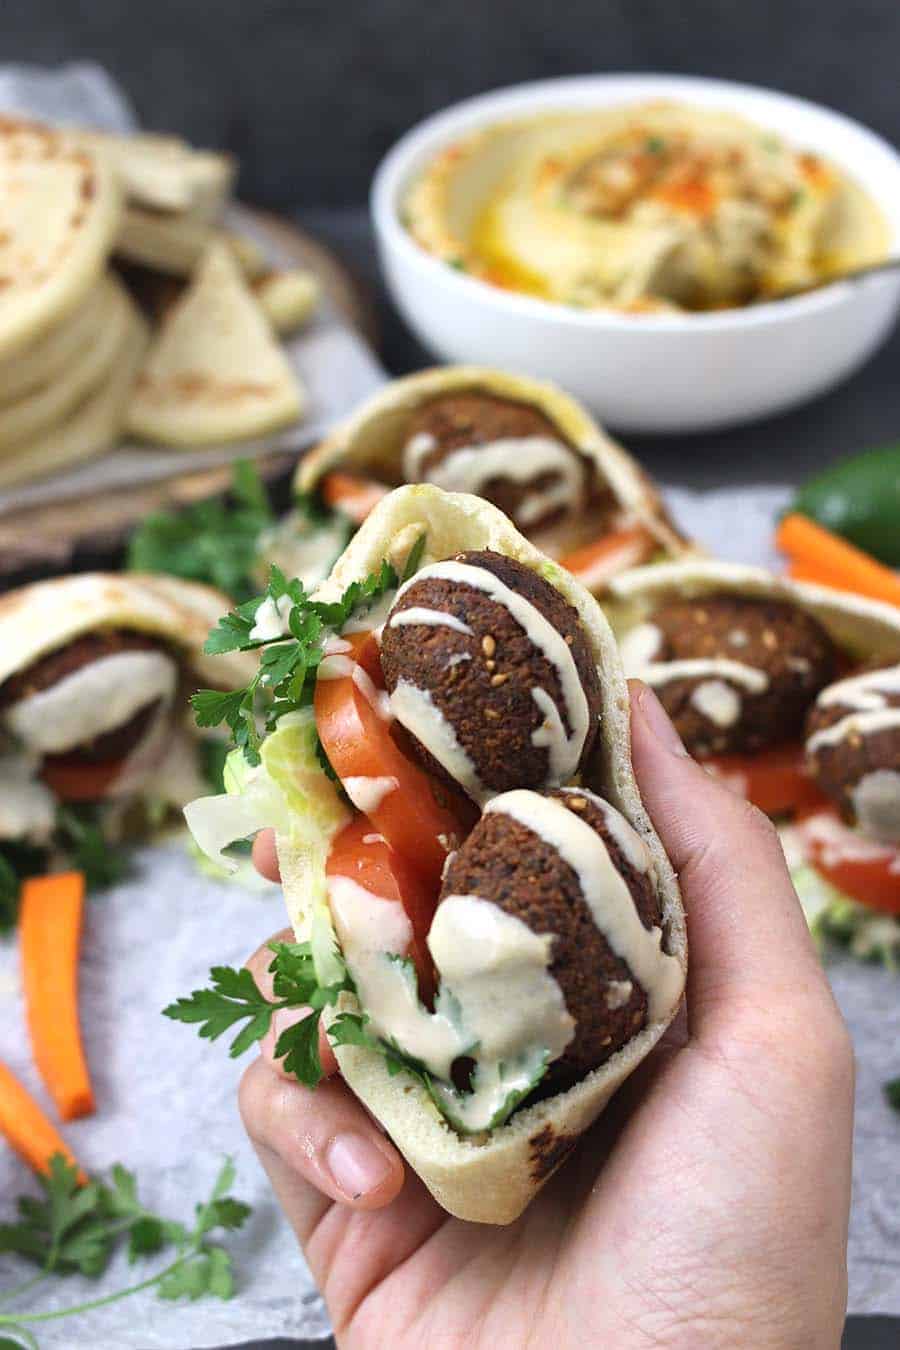 Falafel Pita Sandwich with Tahini Sauce #plantbased #dairyfree #proteinpacked #chickpeasrecipes #summer #picnic #potluck